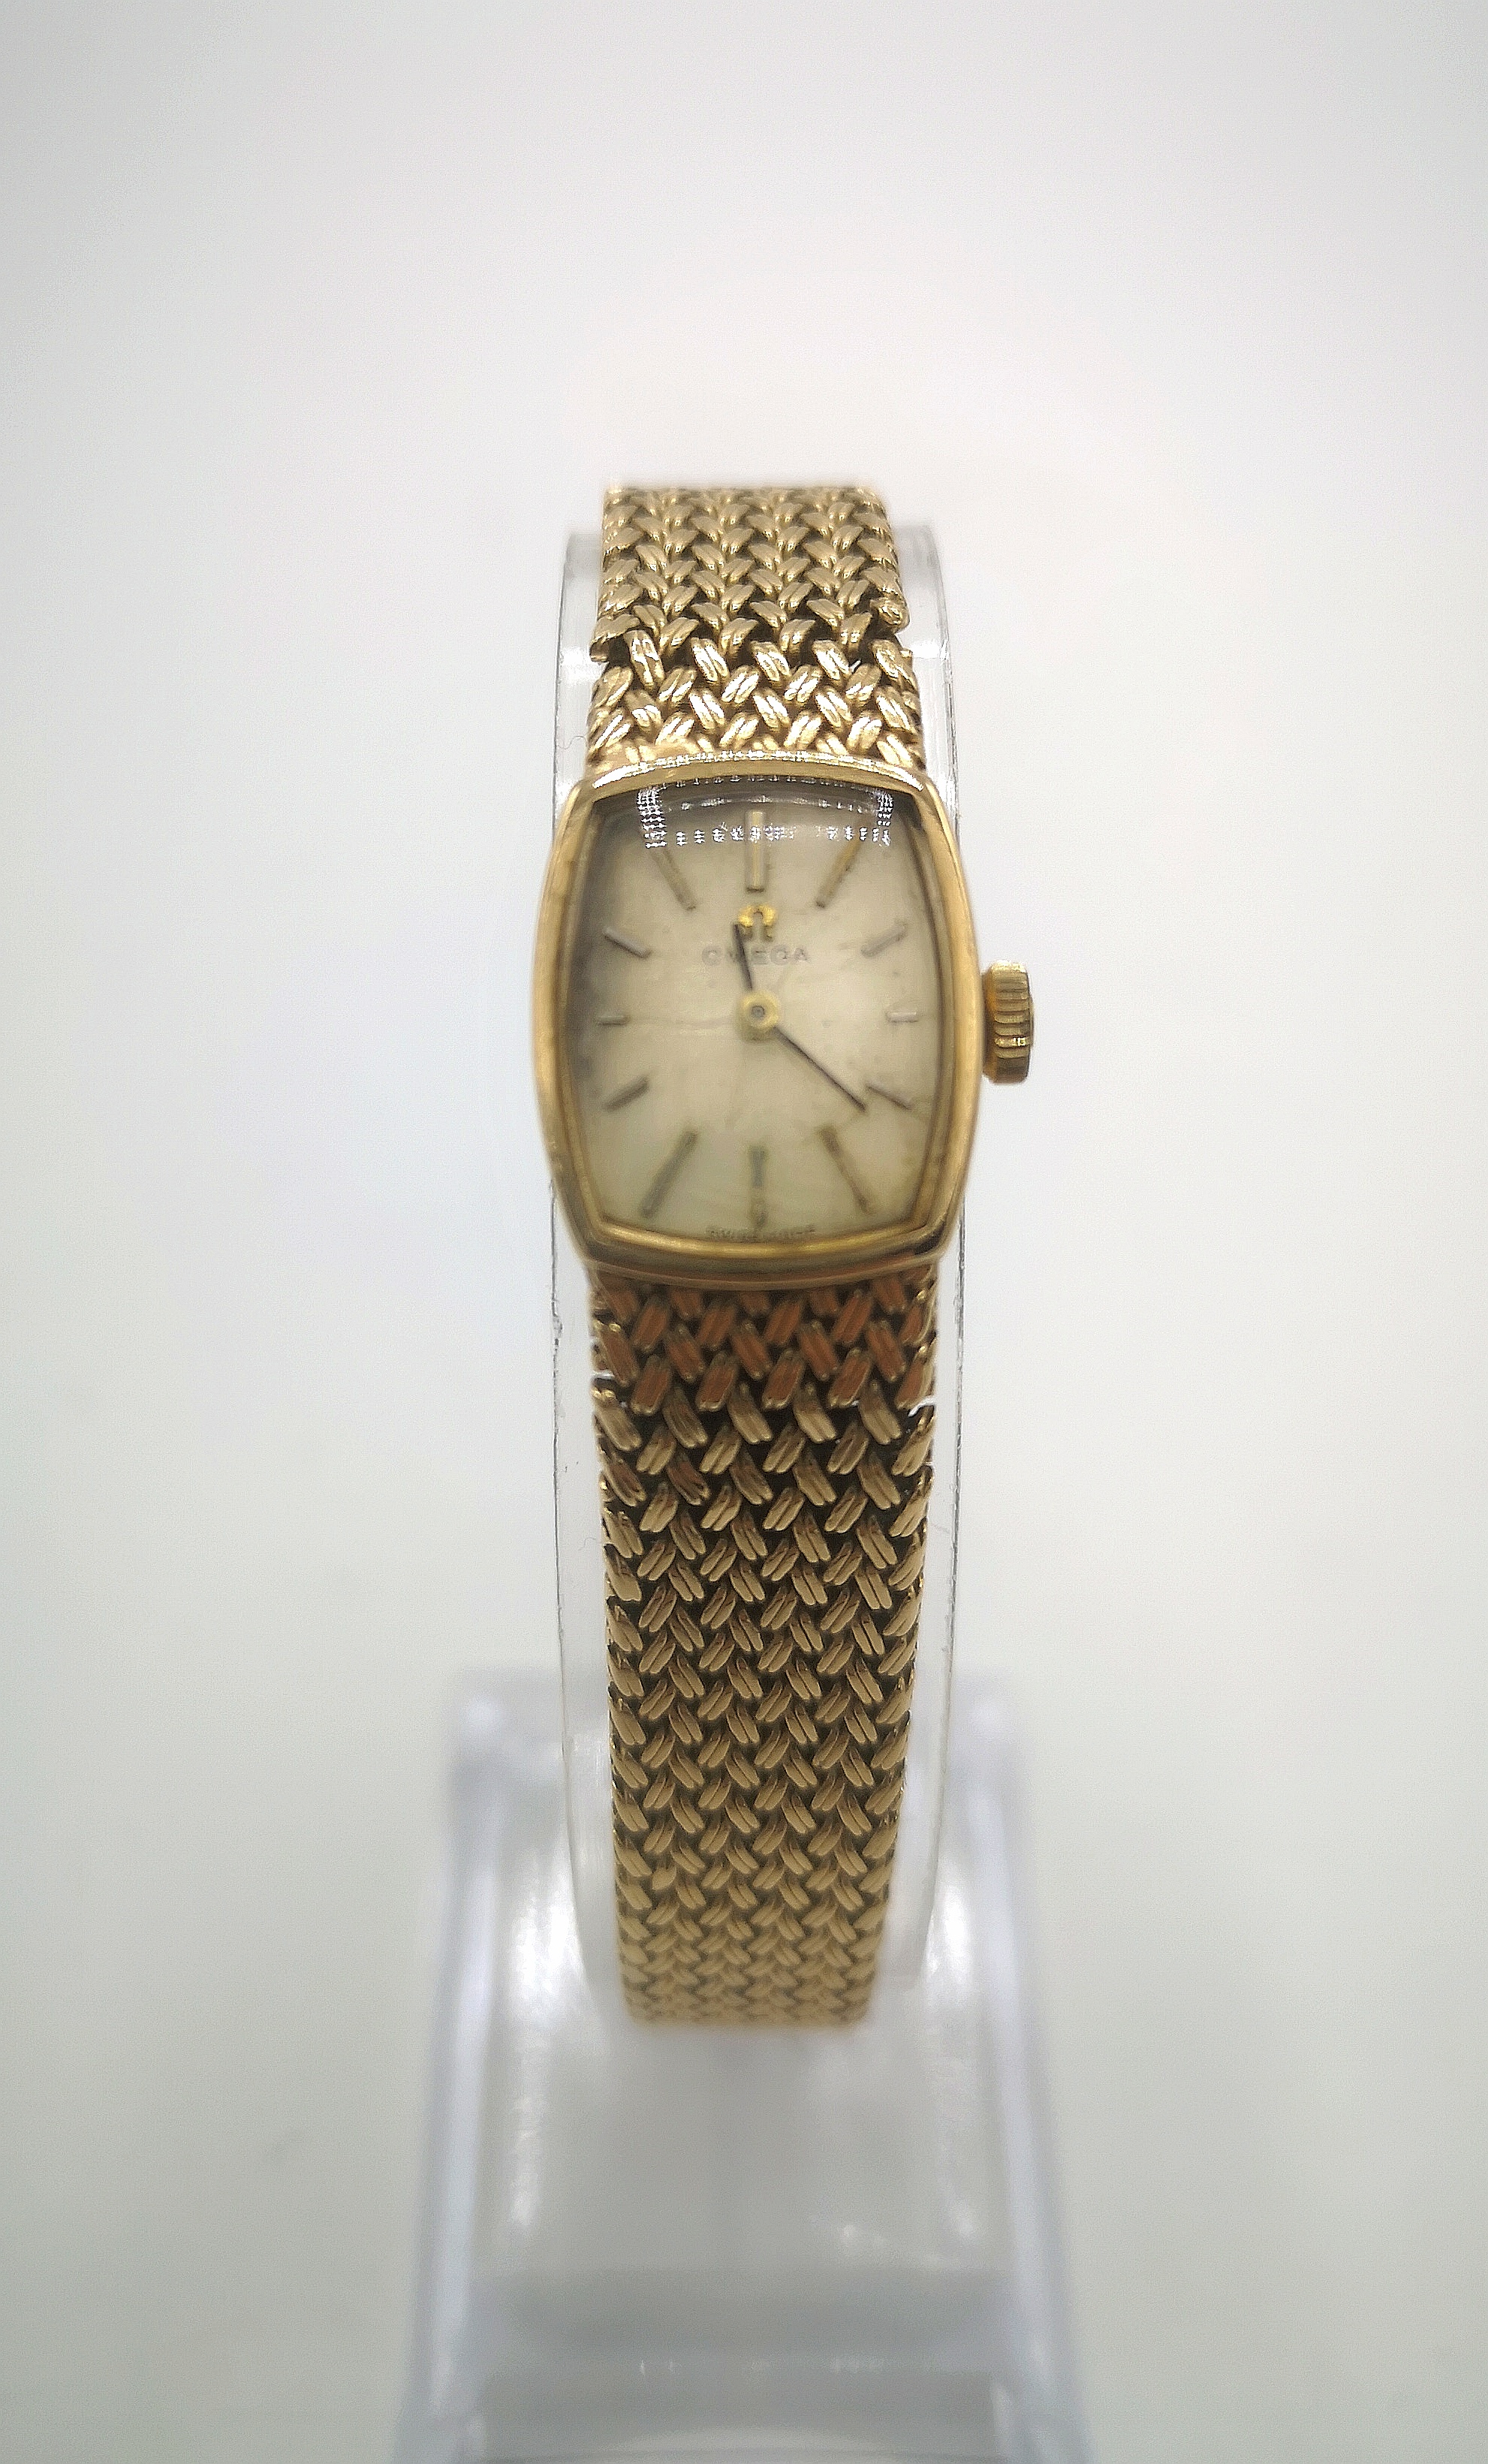 Ladies Omega wristwatch in 9ct gold case